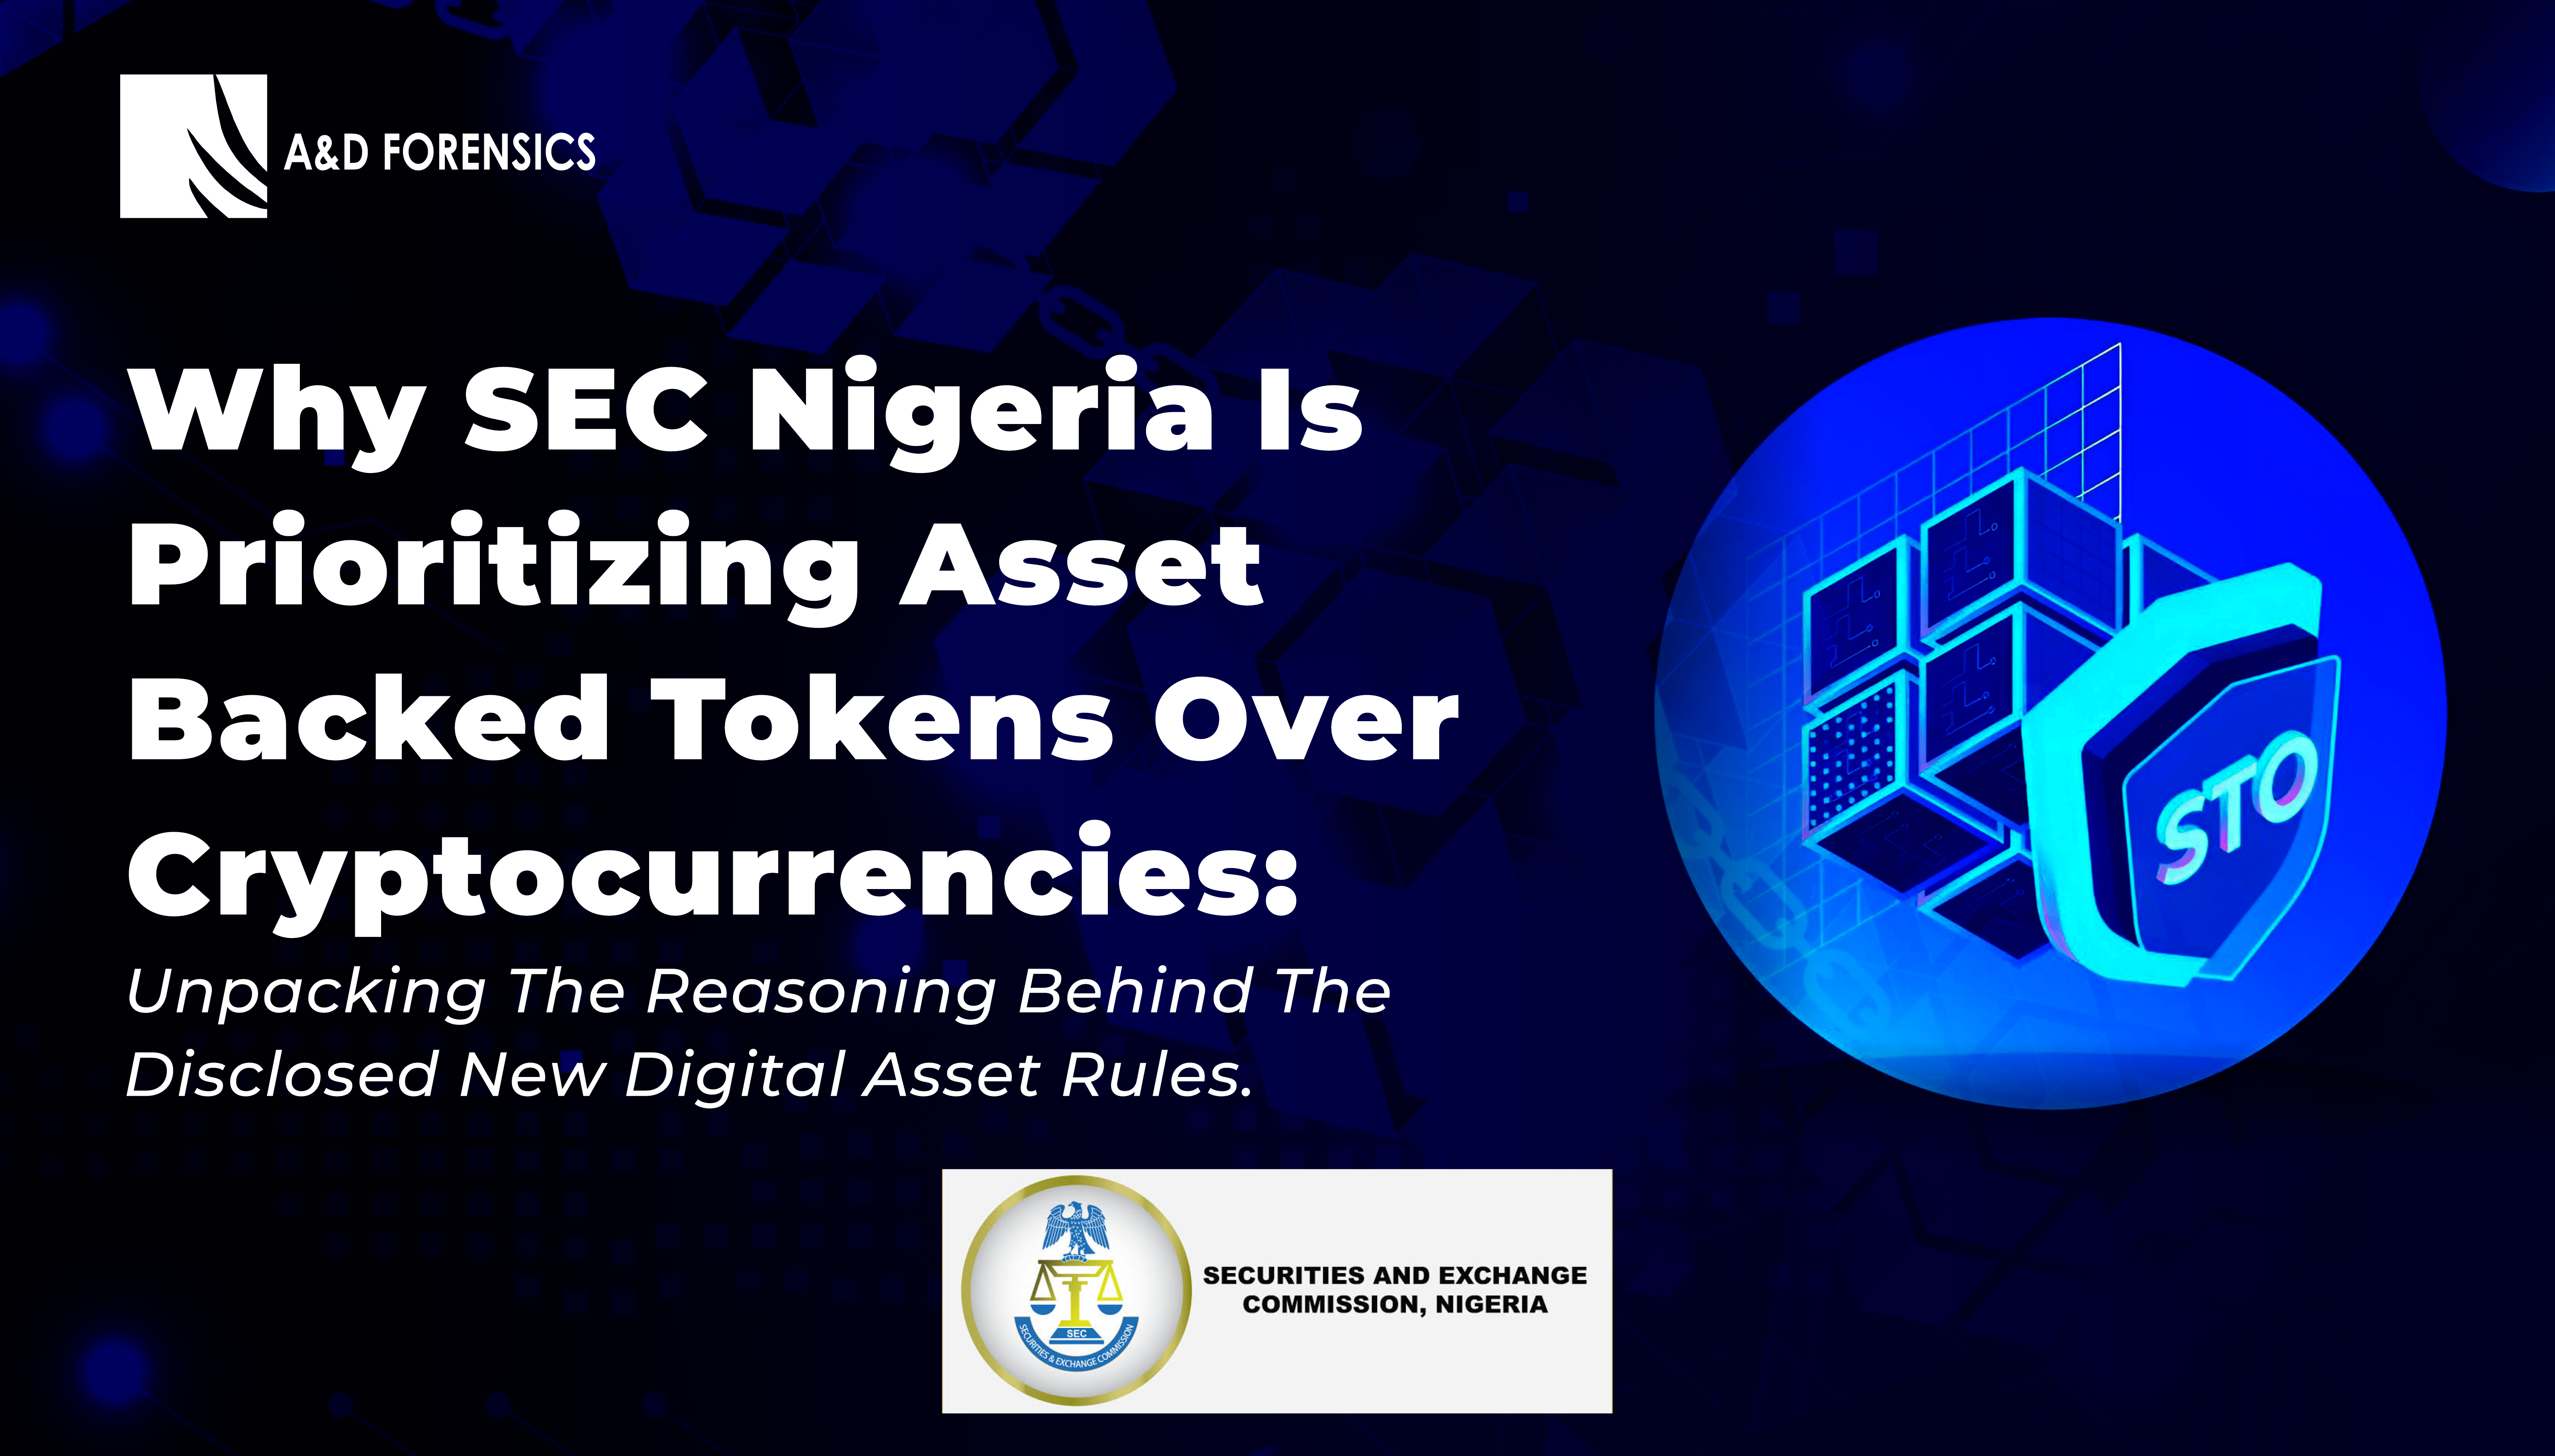 Why SEC Nigeria is Prioritizing Asset-Backed Tokens Over Cryptocurrencies: Unpacking the Reasoning Behind the Disclosed New Digital Asset Rules